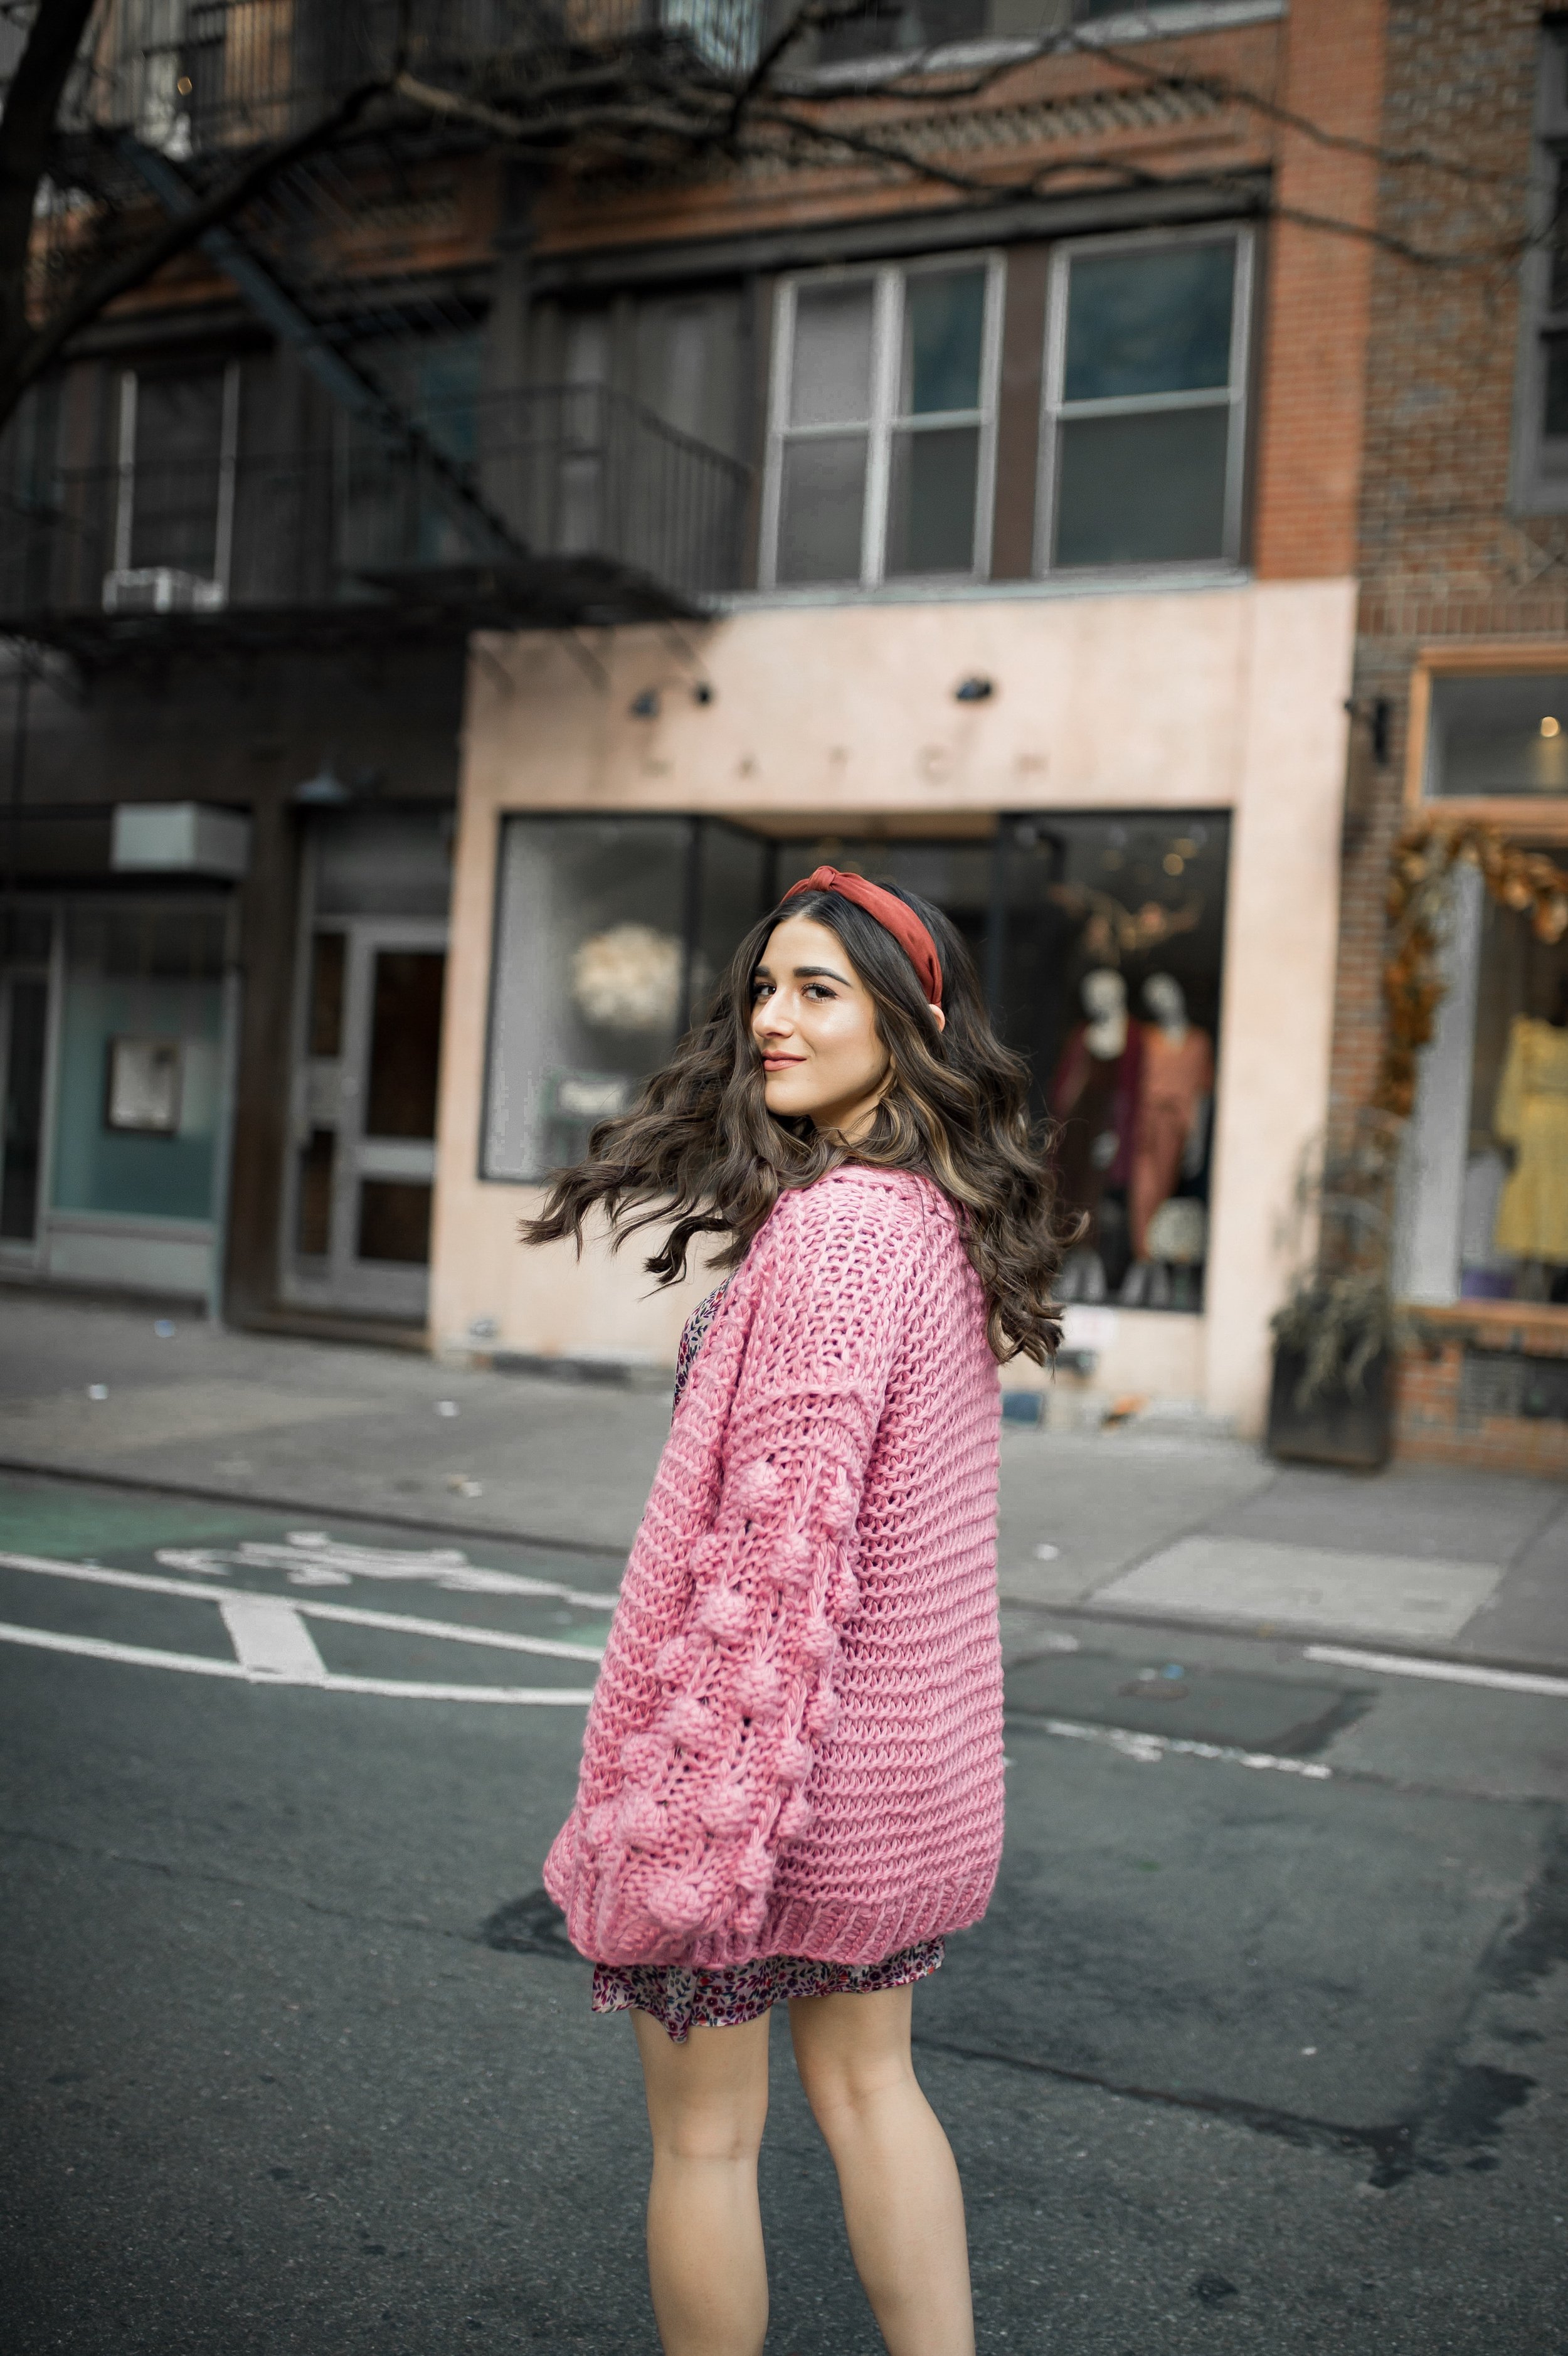 How Being In A Miserable Job Shaped My Entire Career Silk Floral Dress + Pink Pom Pom Sweater Esther Santer Fashion Blog NYC Street Style Blogger Outfit OOTD Trendy Shopping Mango Sale Winter  How To Wear Maroon Velvet Booties Zac Posen Swarovski Bag.jpg